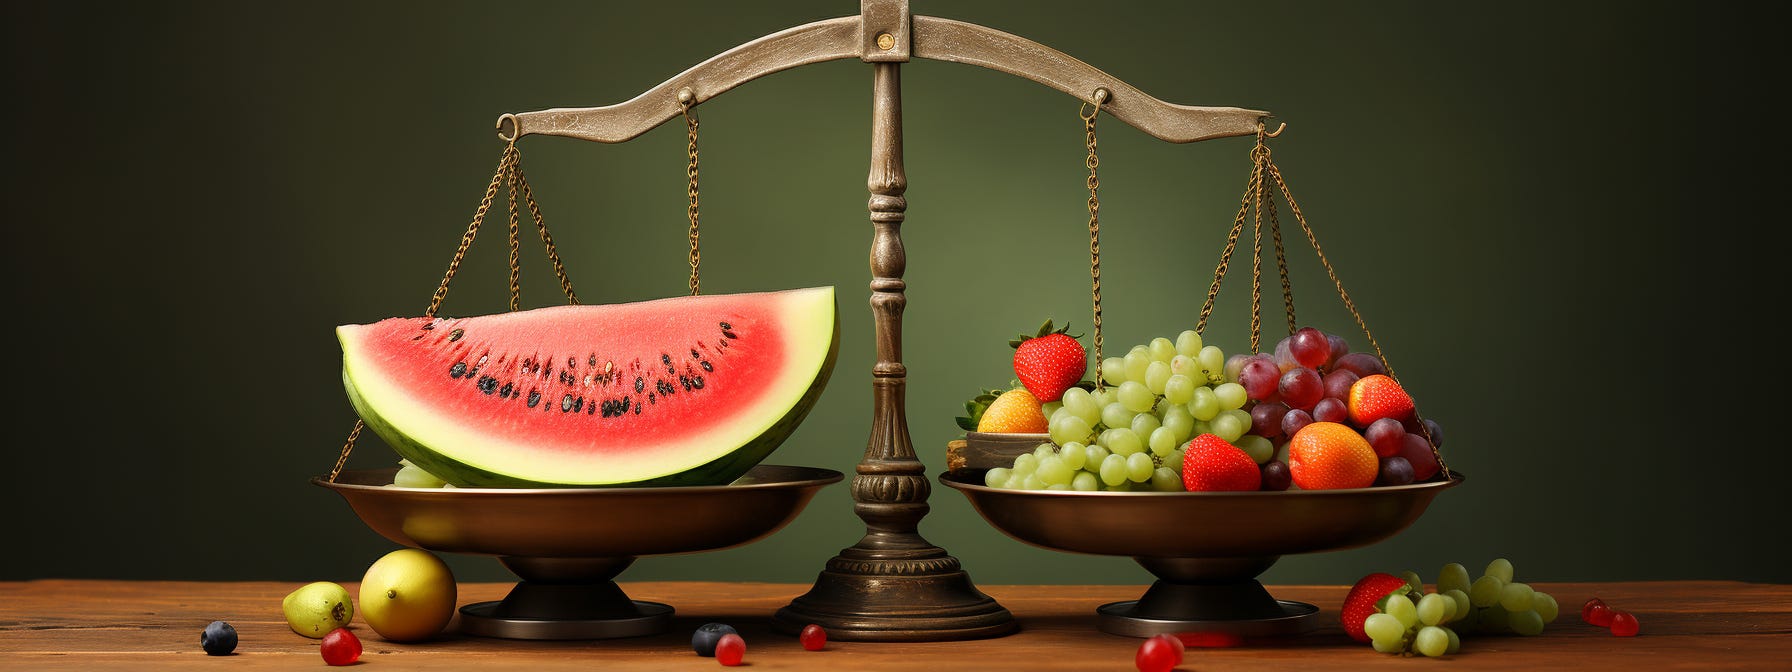 A scale with a big watermelon on one side and various small fruit on the other side standing in balance